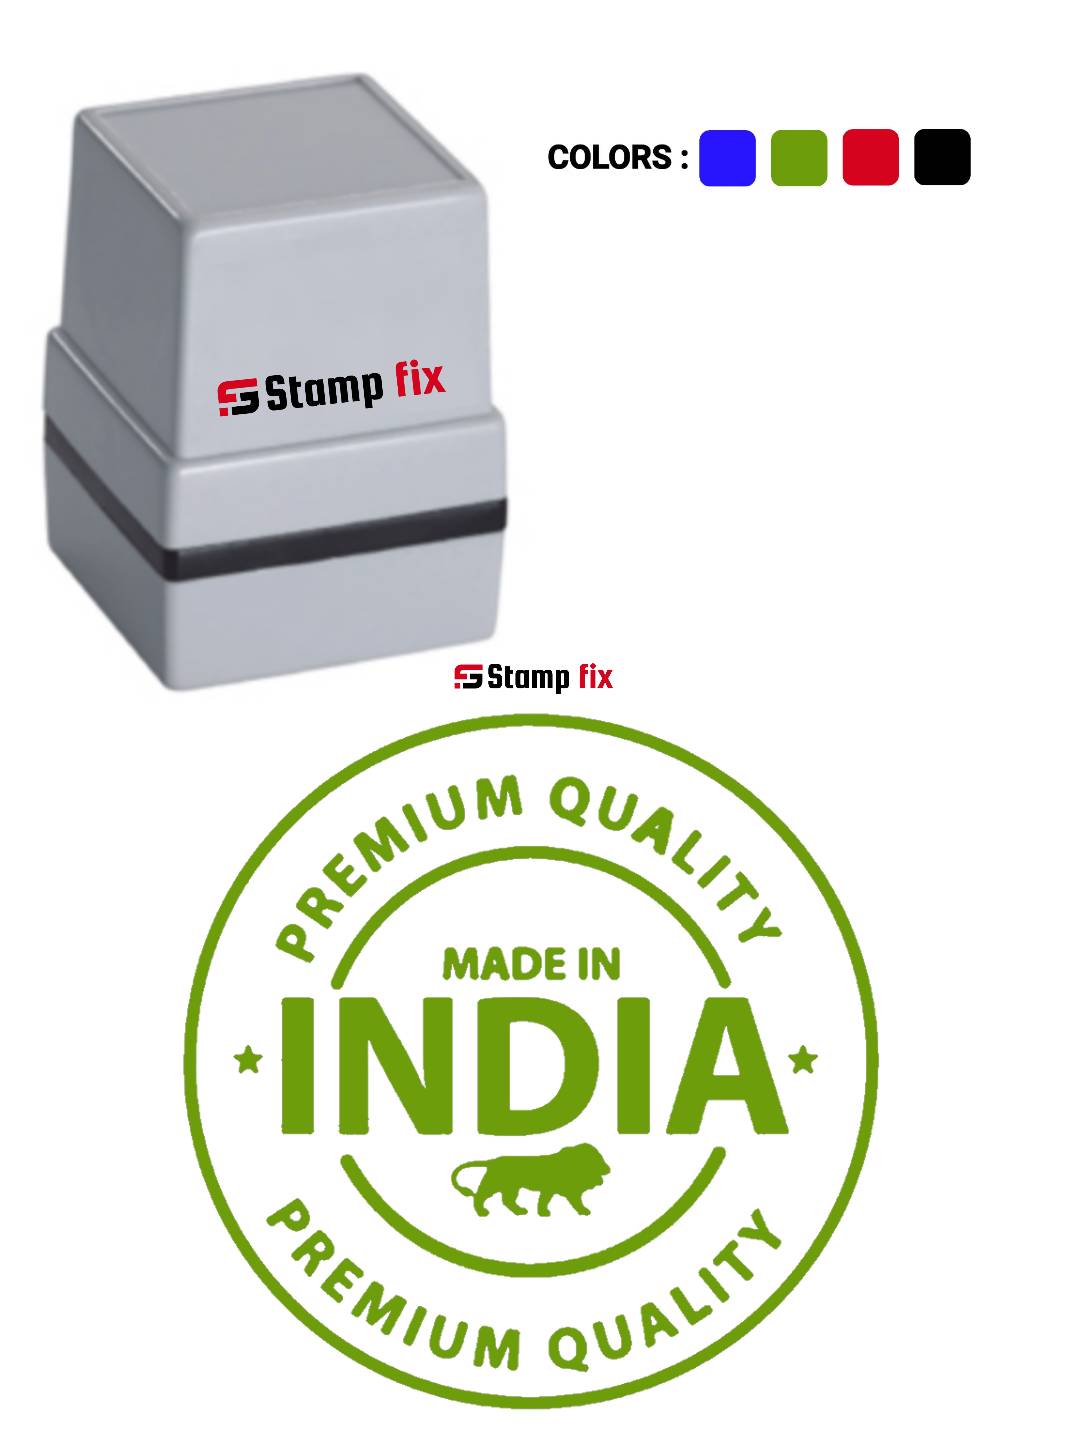 Pre Ink Made in India stamp, make in india stamp, made in India logo, make in india logo,Stamp by StampFix, a self-inking stamp with high-quality impressions
in India, nylon stamp, rubber stamp, pre ink stamp, polymer stamp, urgent stamp